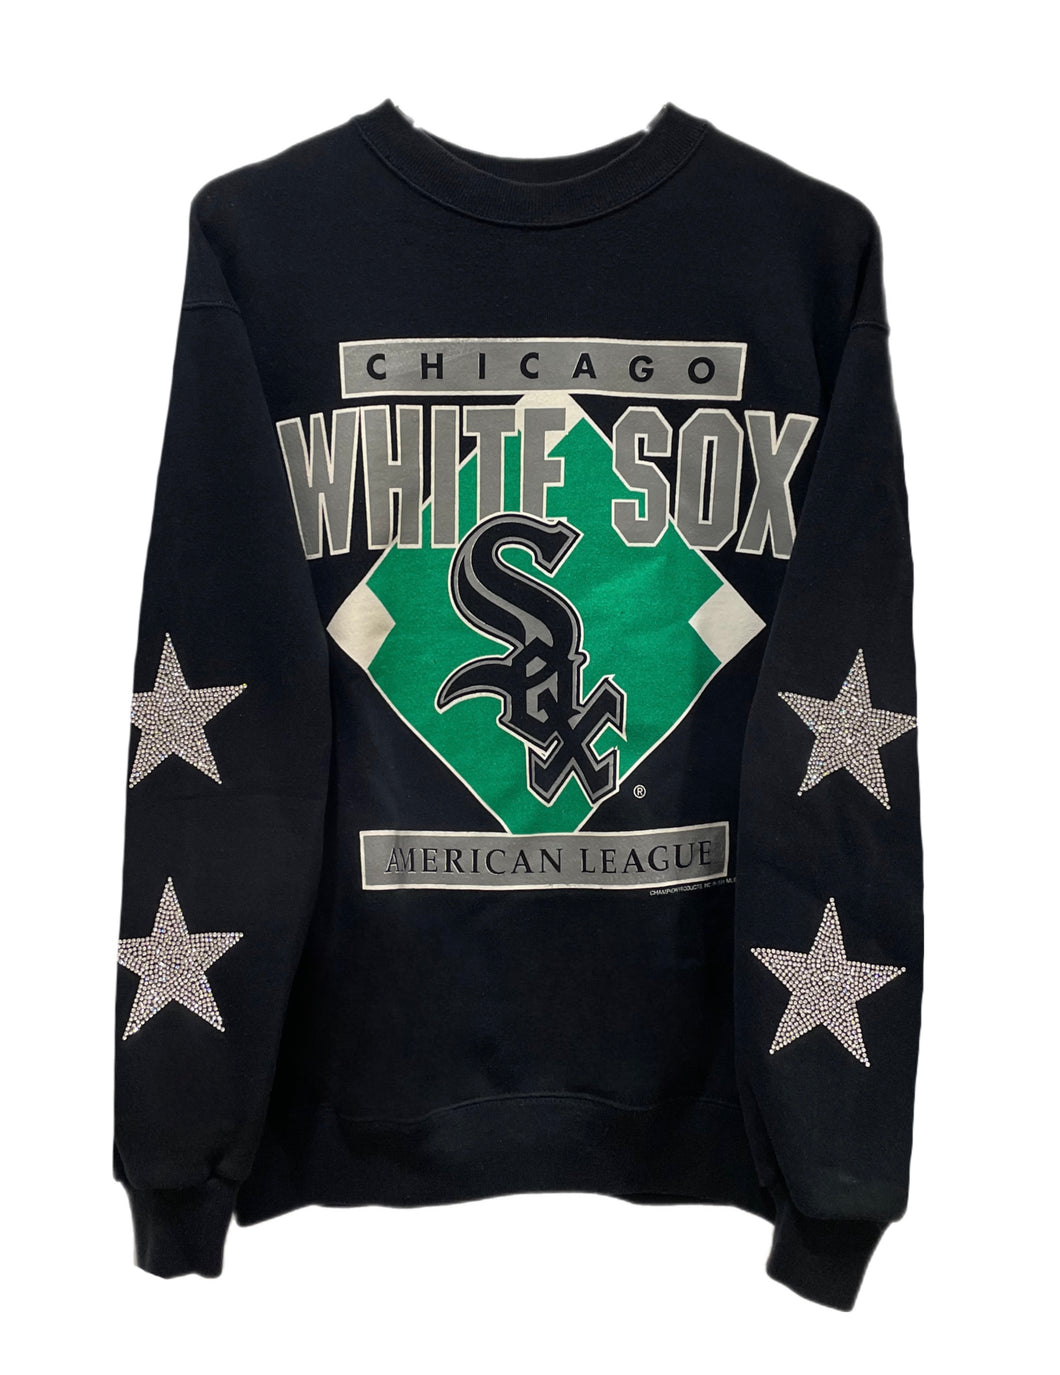 Chicago White Sox, MLB One of a KIND Vintage Sweatshirt with Crystal Star Design